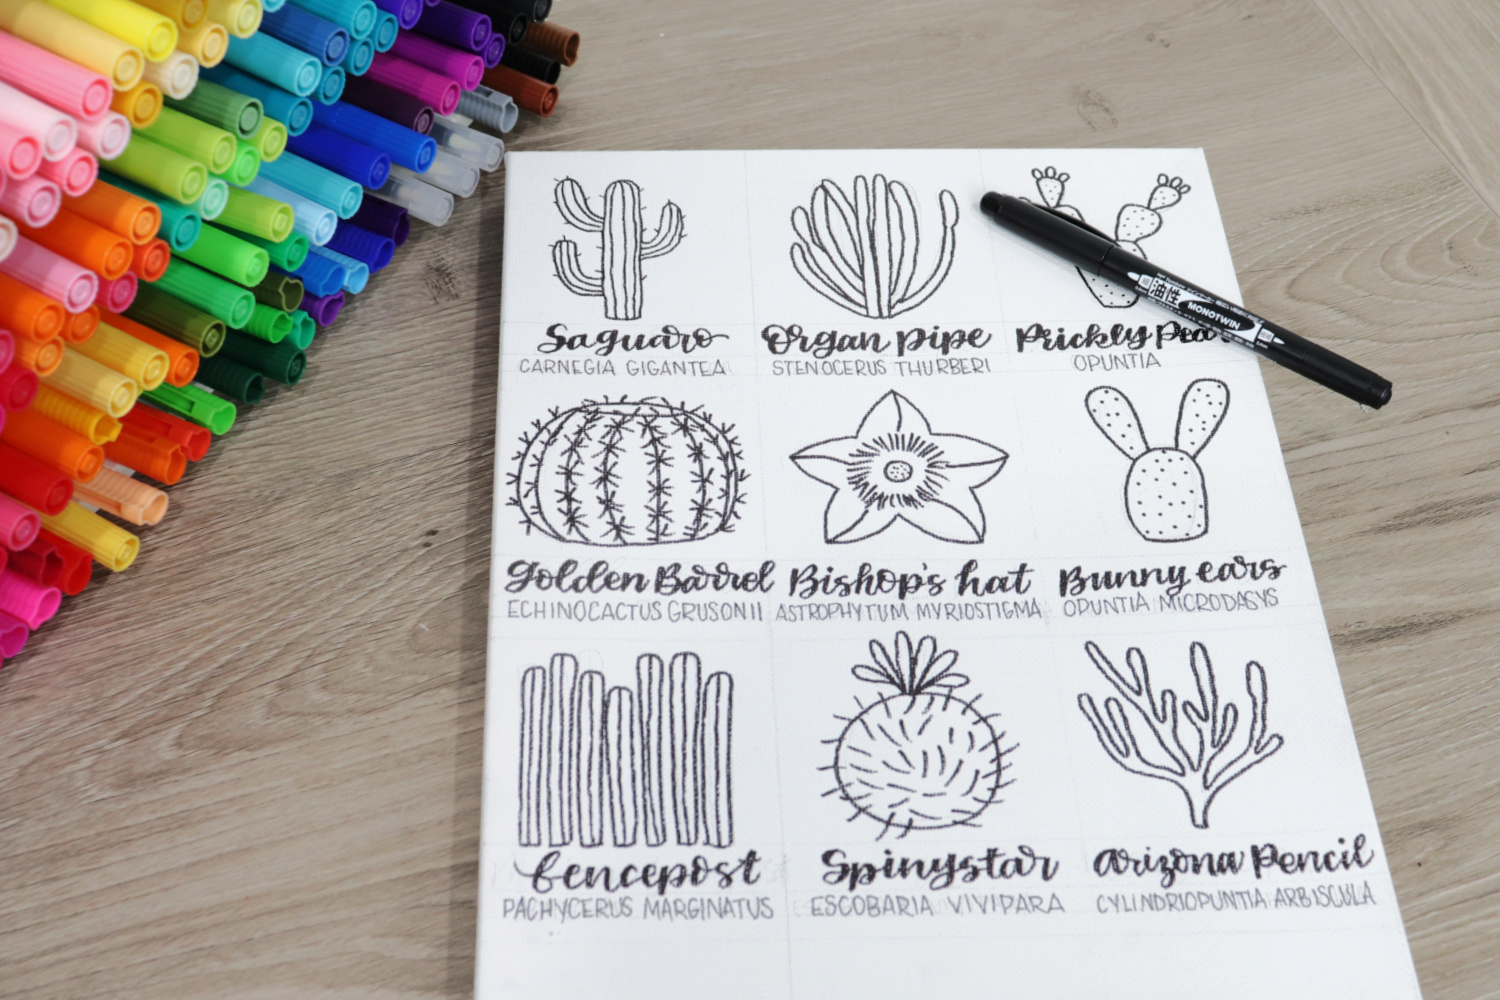 Image contains a white canvas with nine cactus doodles and names in black marker. A MONO Twin marker sits on top of the canvas, which is on a wooden desk. Multicolored markers in an organizer sit nearby on the left of the canvas.